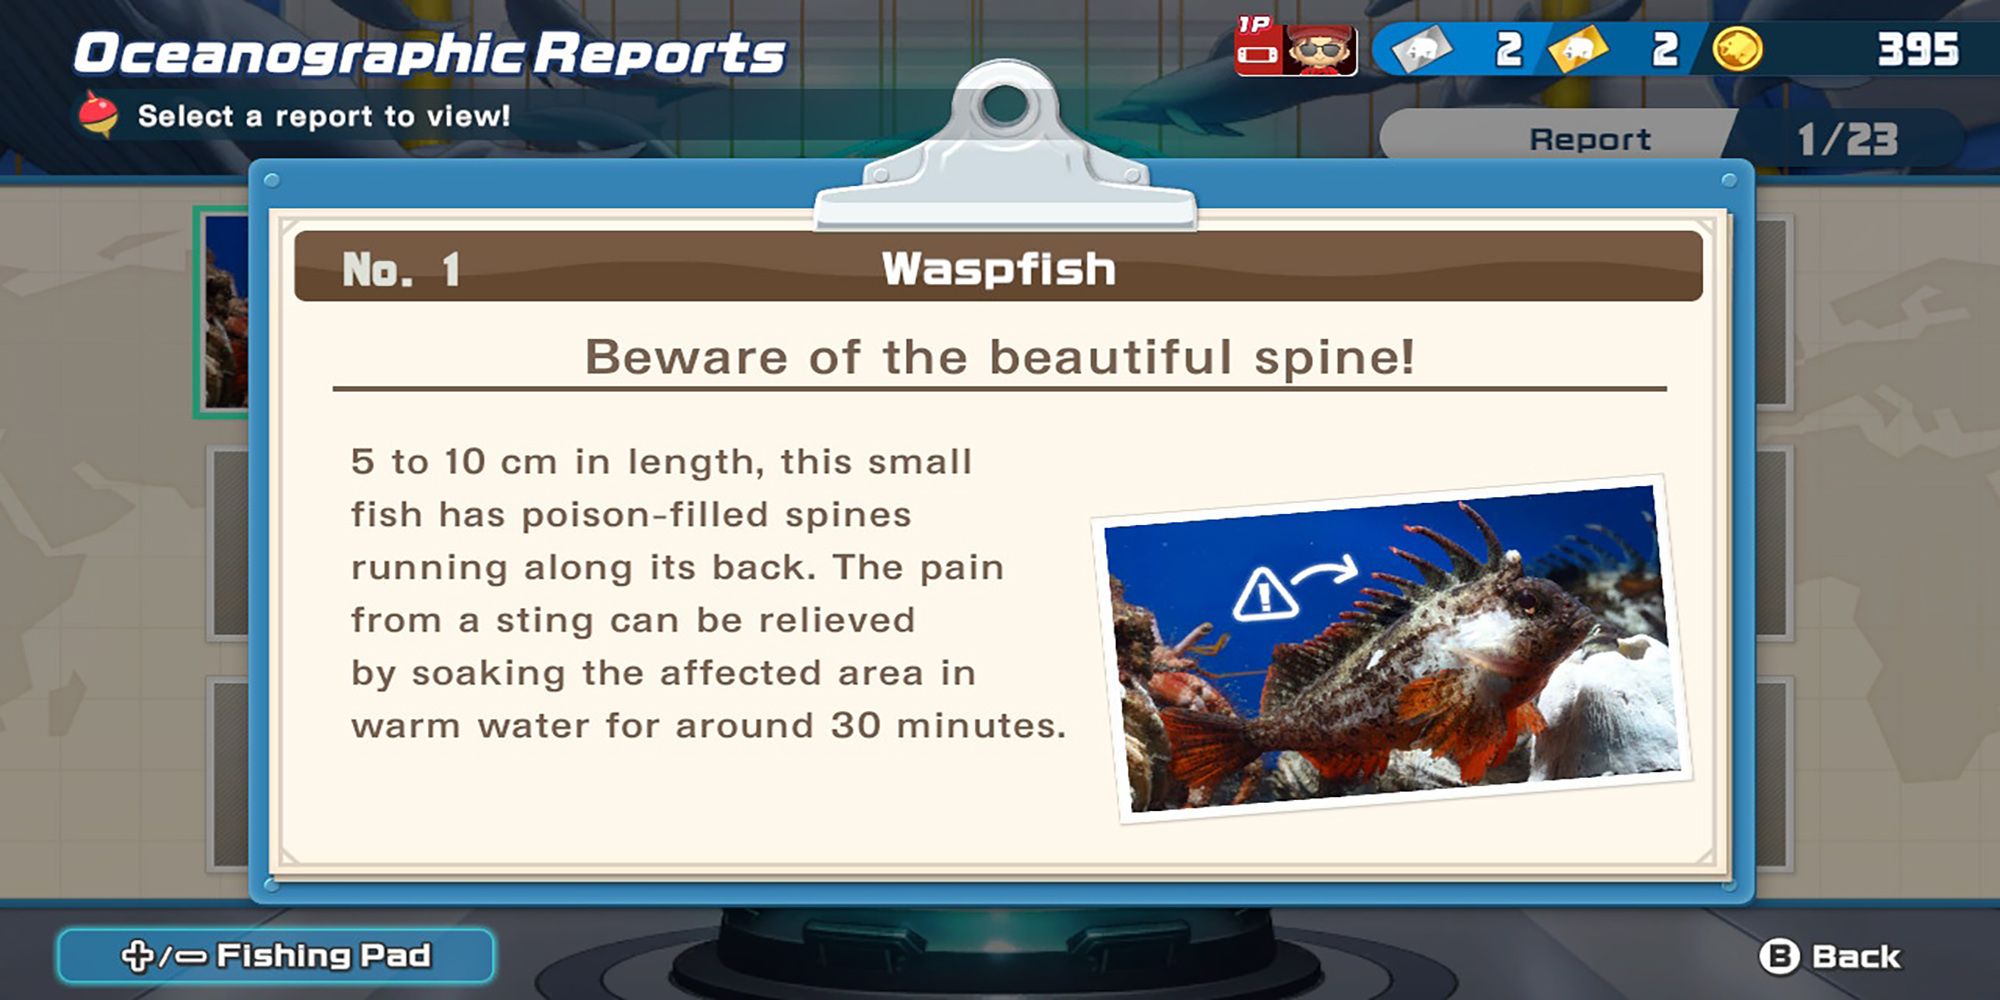 The Waspfish Oceanographic Report, pointing out its poisoned-filled spines, in Ace Angler: Fishing Spirits.